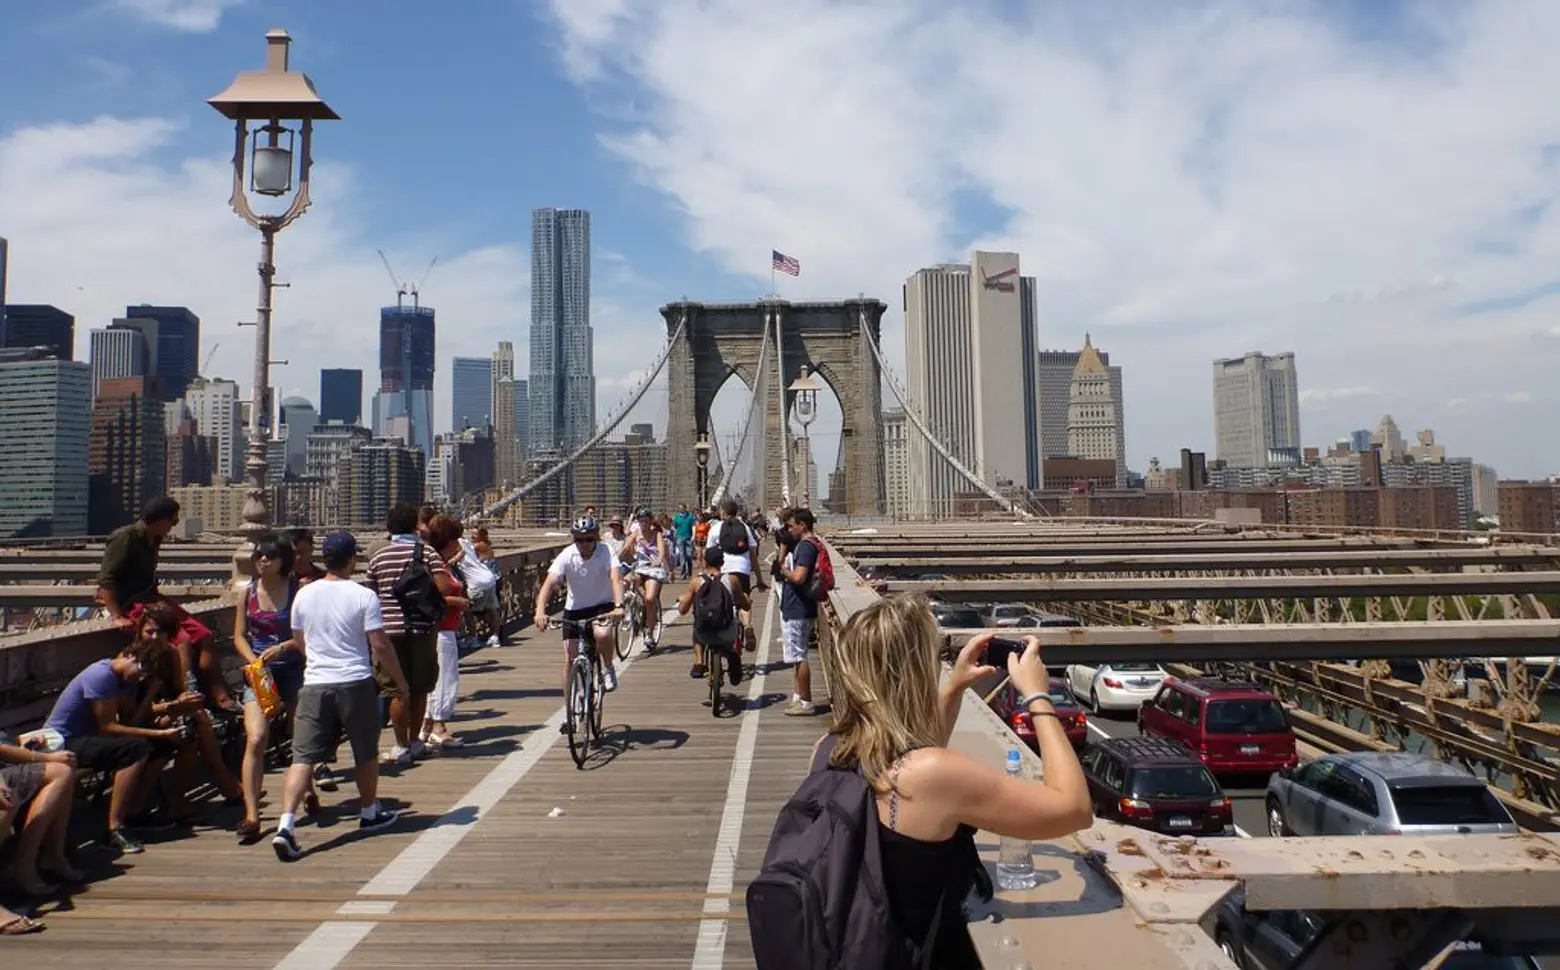 Brooklyn Bridge May Get Expanded Promenade to Accommodate Growing Crowds